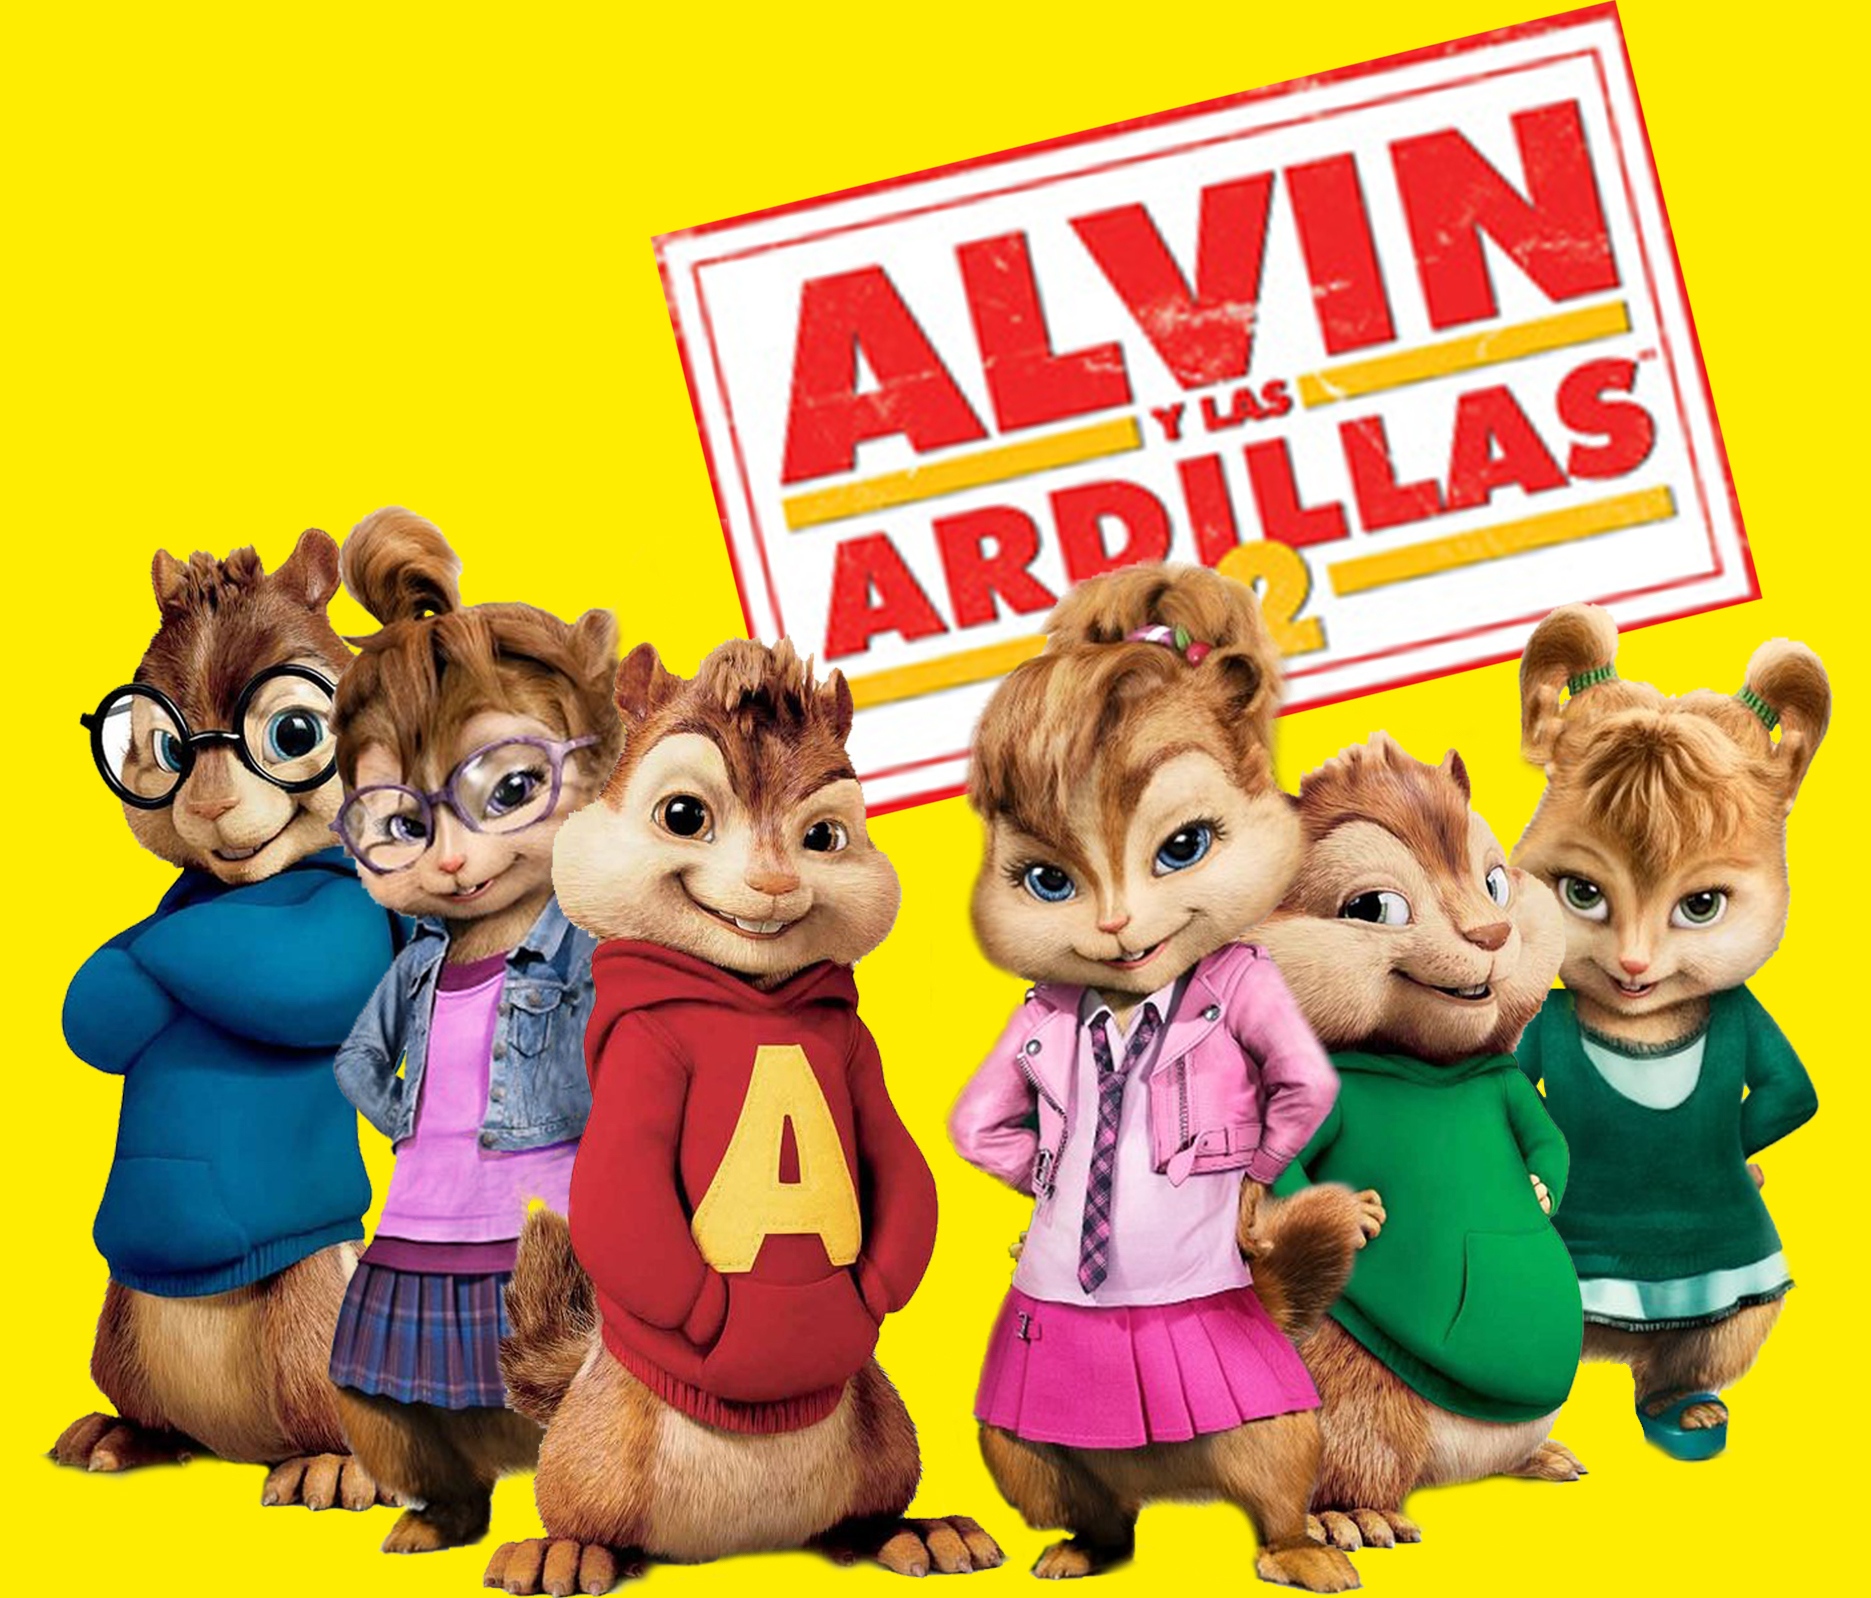 names of the chipmunks